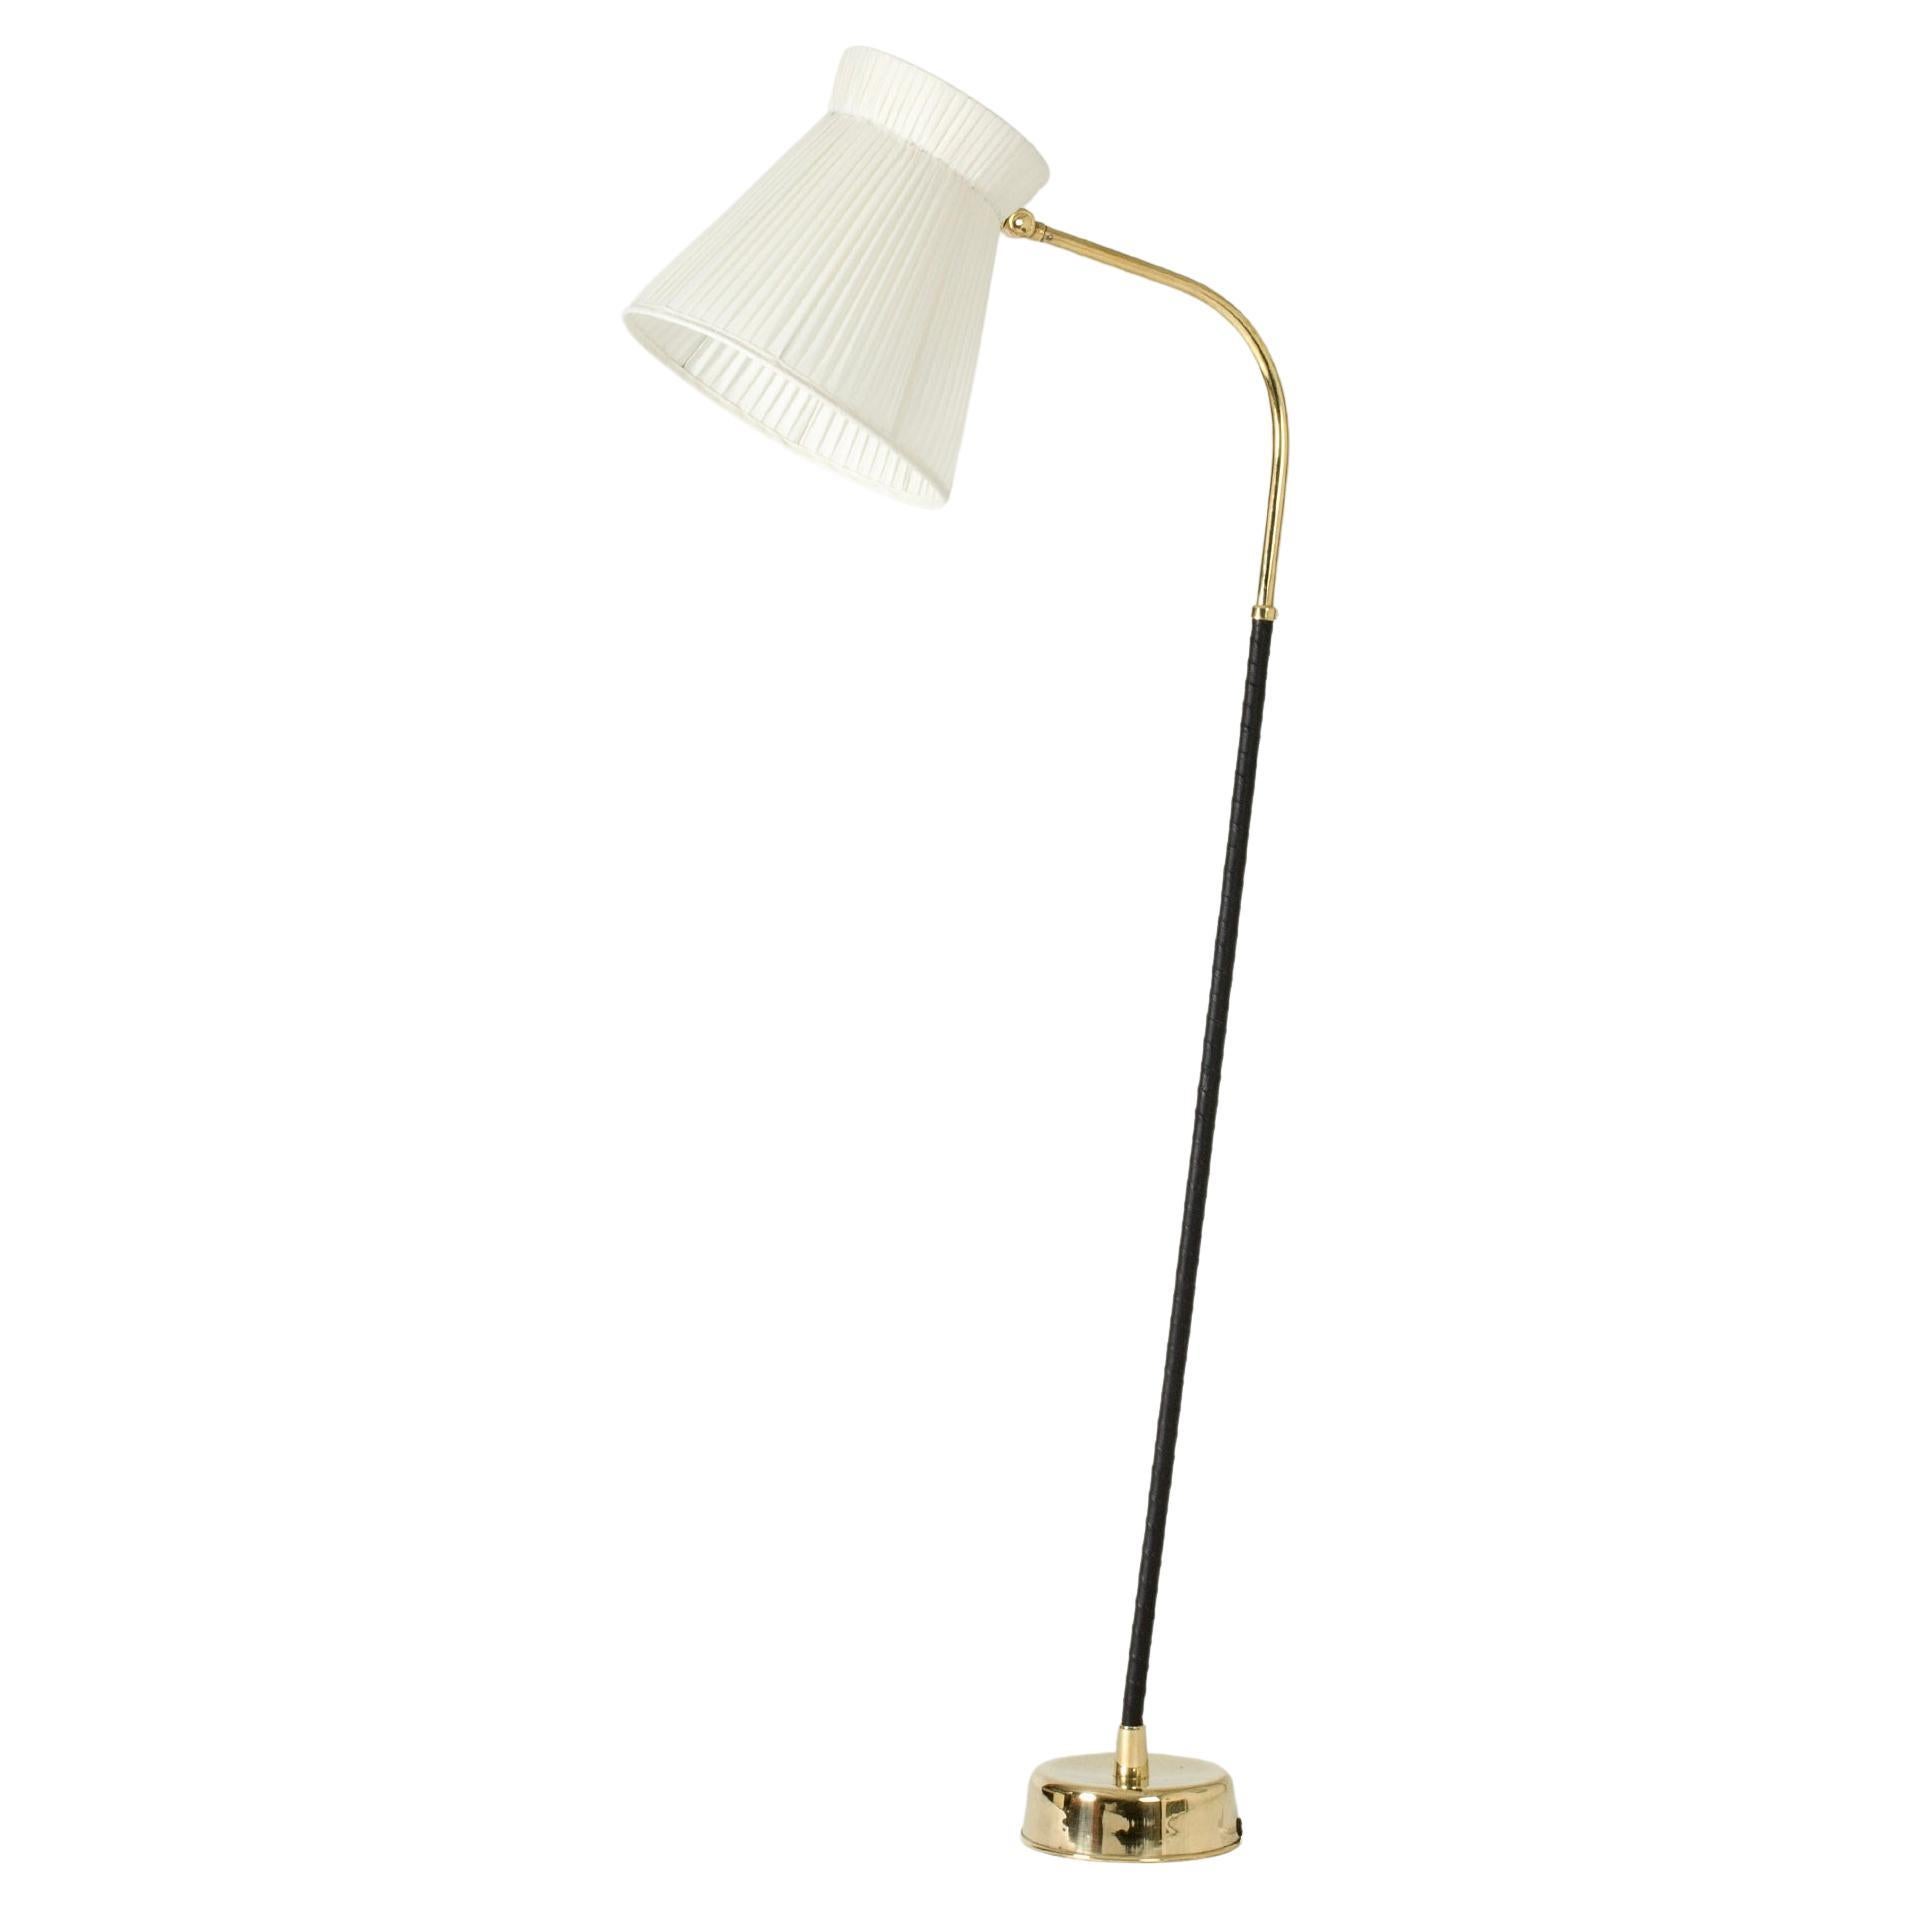 Midcentury Modern Floor Lamp by Lisa Johansson-Pape for Orno, Finland For Sale